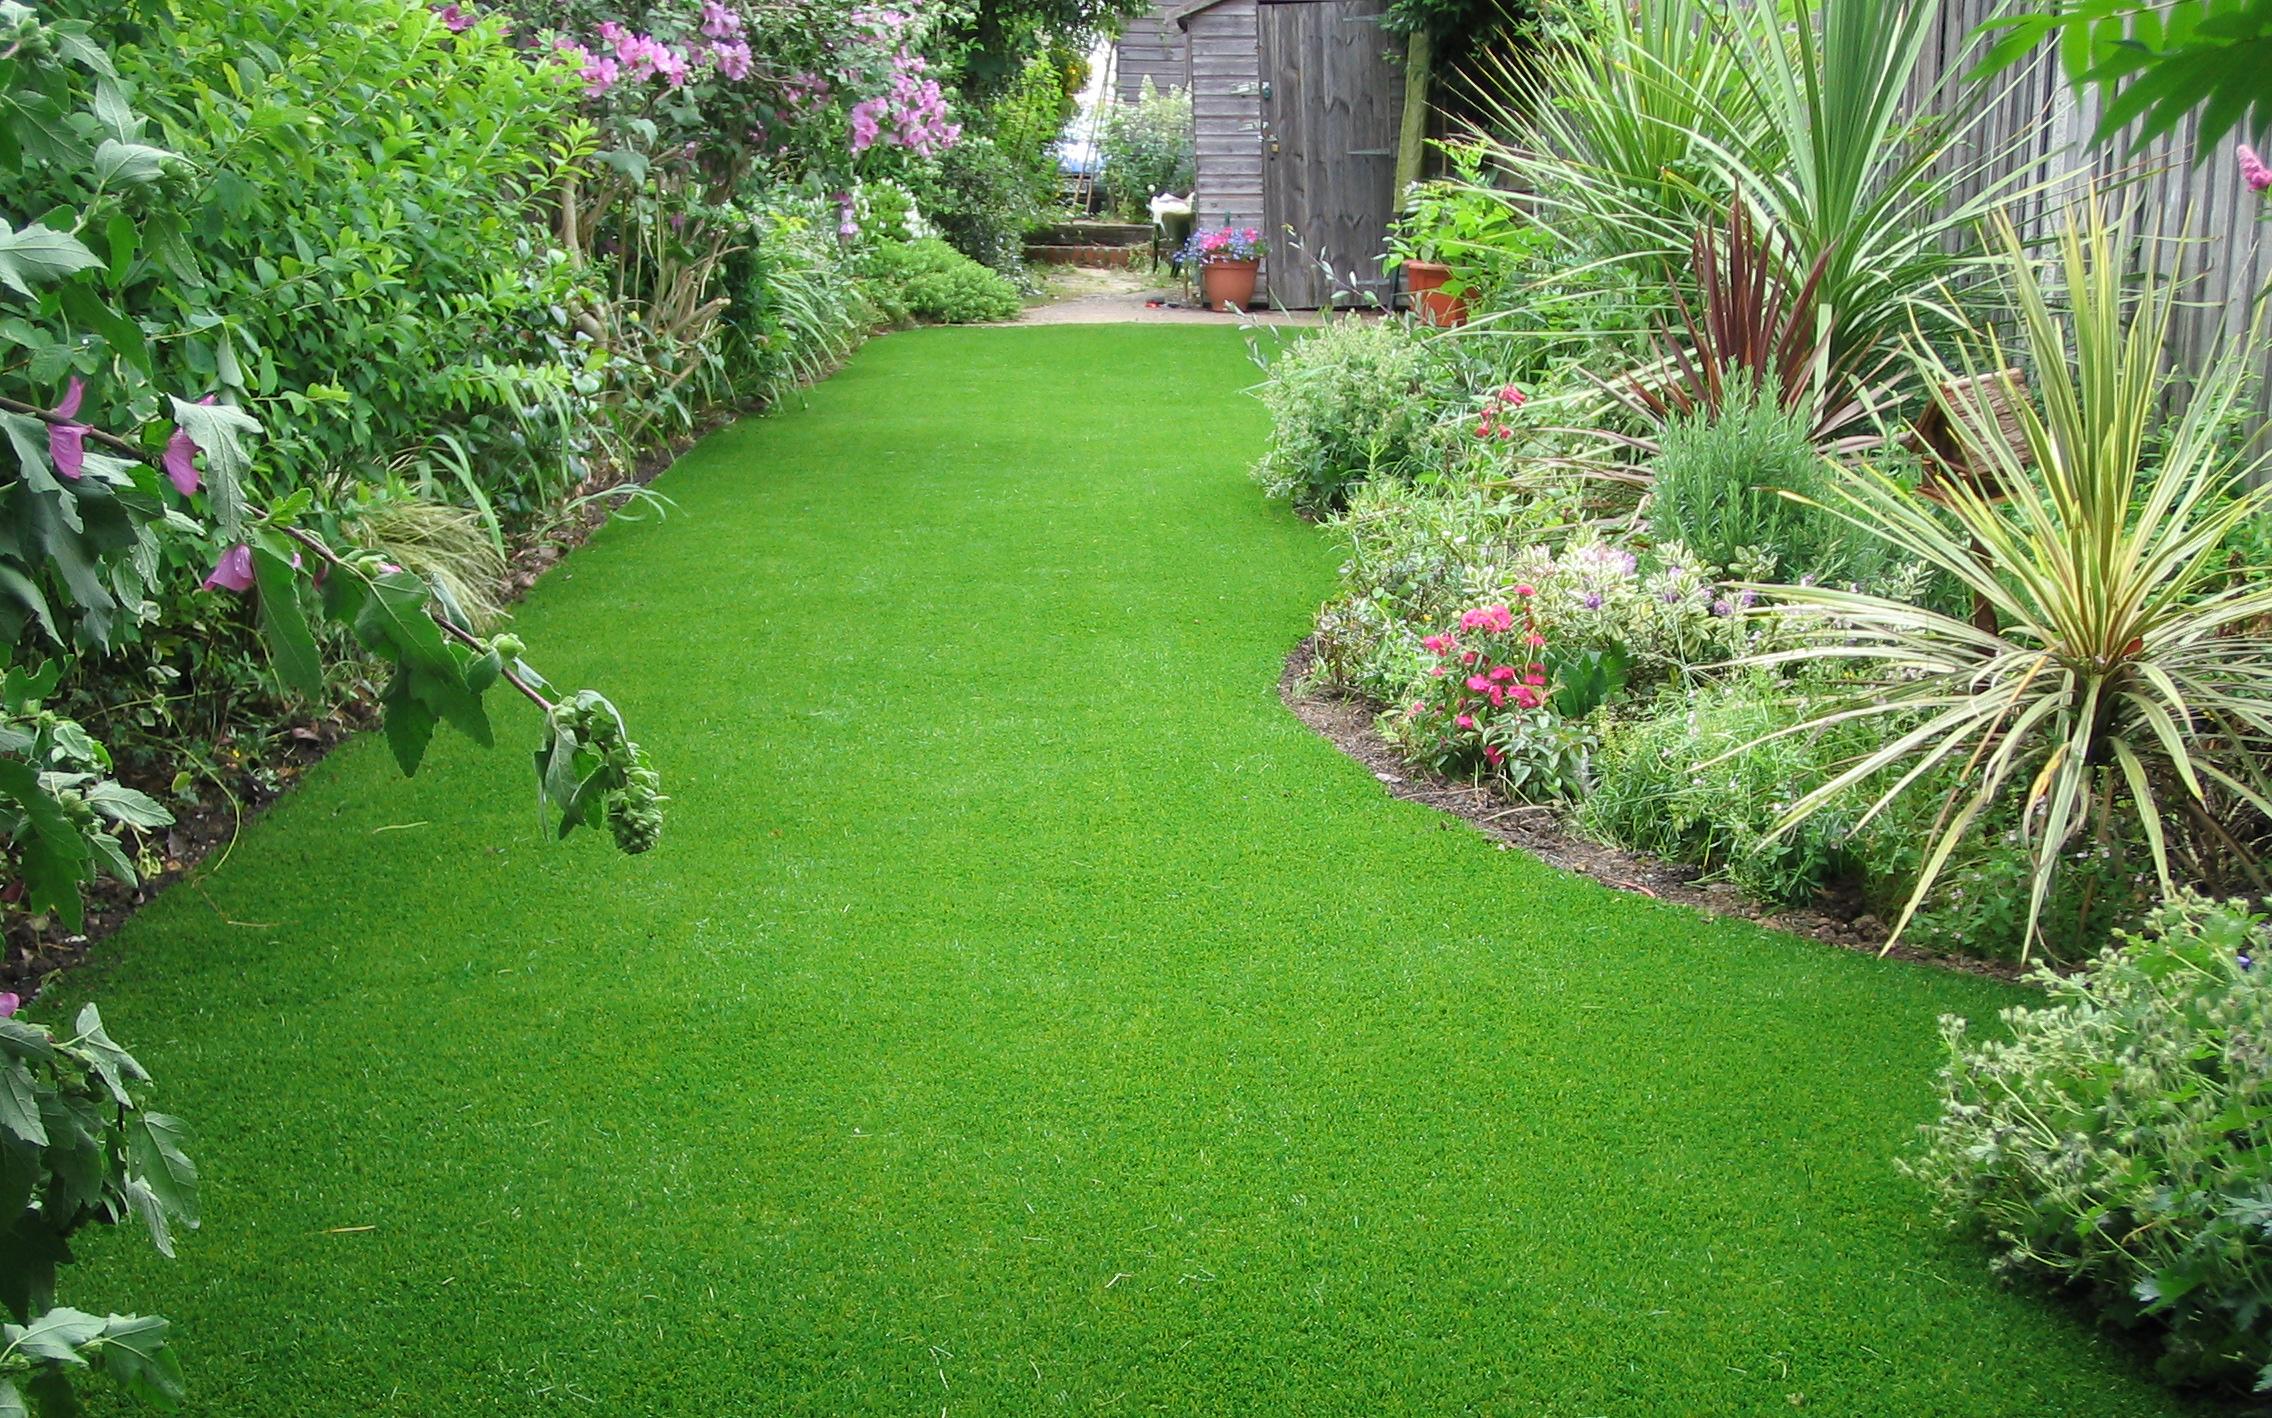 Artificial Turf Installation Services